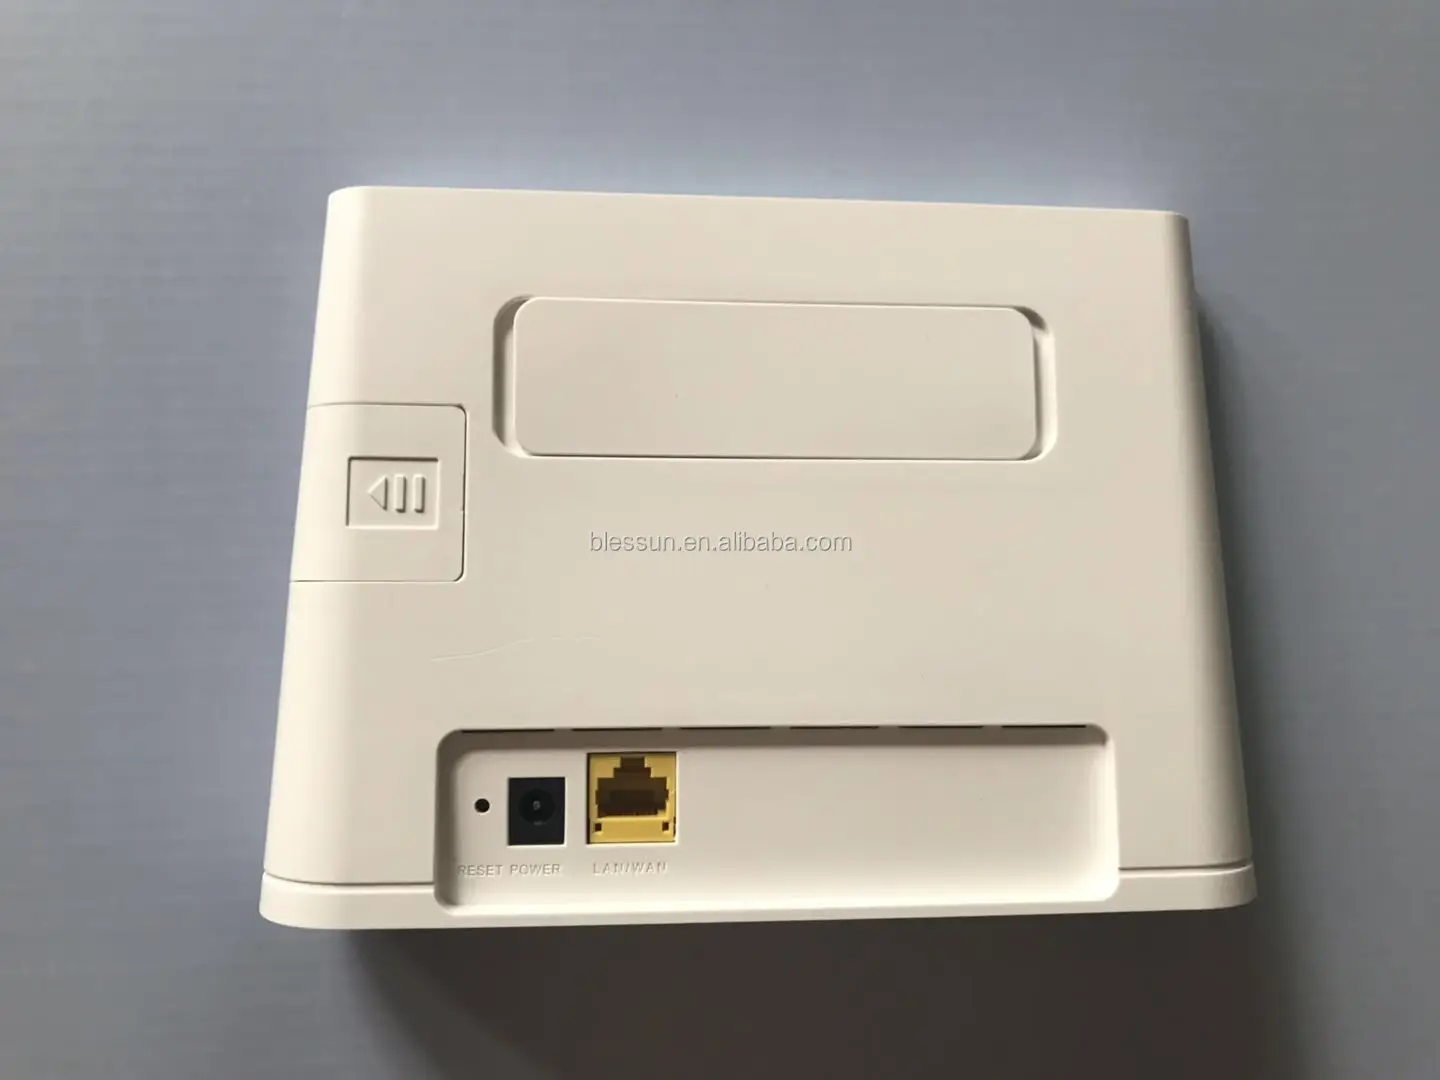 Huawei B310 LTE CPE Router Unlocked to any network,including B38 TDD2600